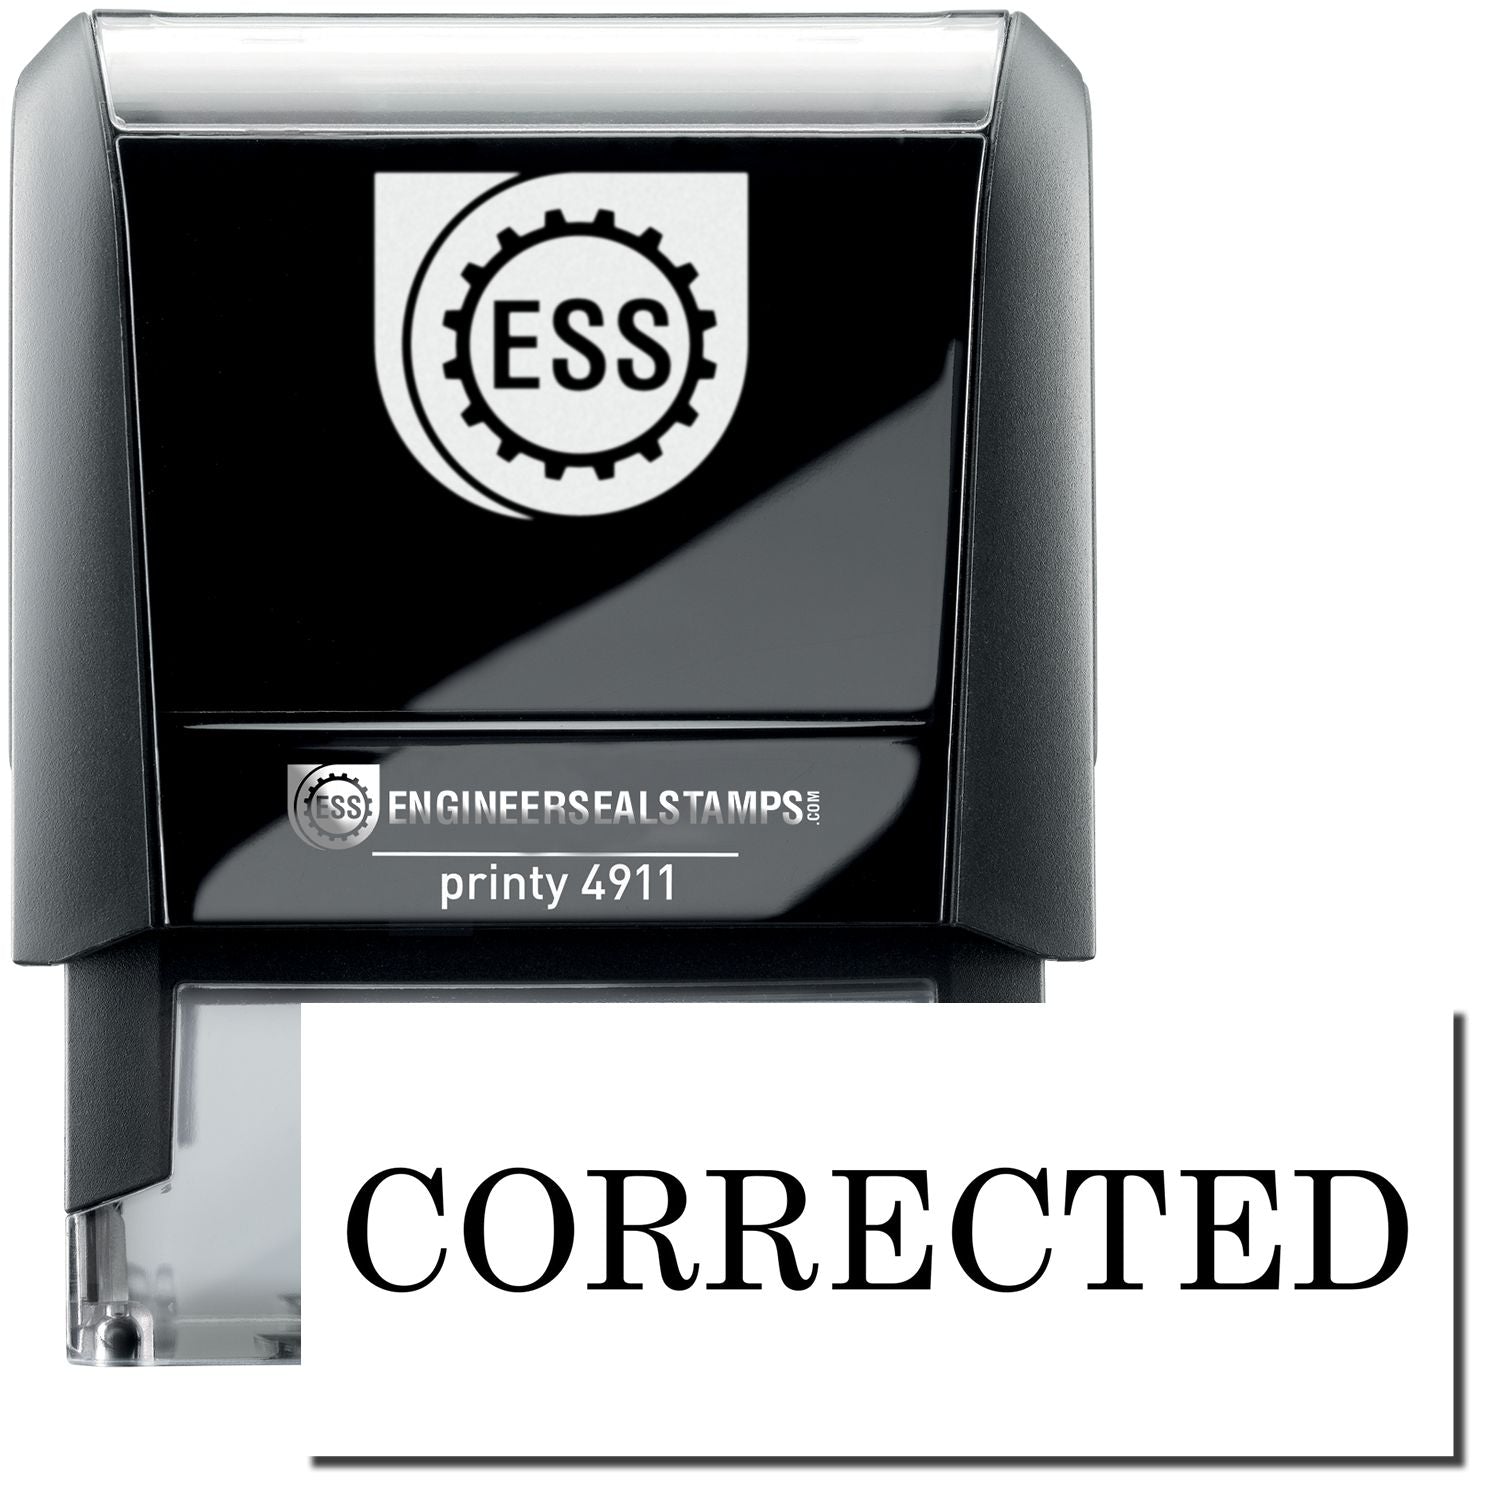 A self-inking stamp with a stamped image showing how the text "CORRECTED" is displayed after stamping.